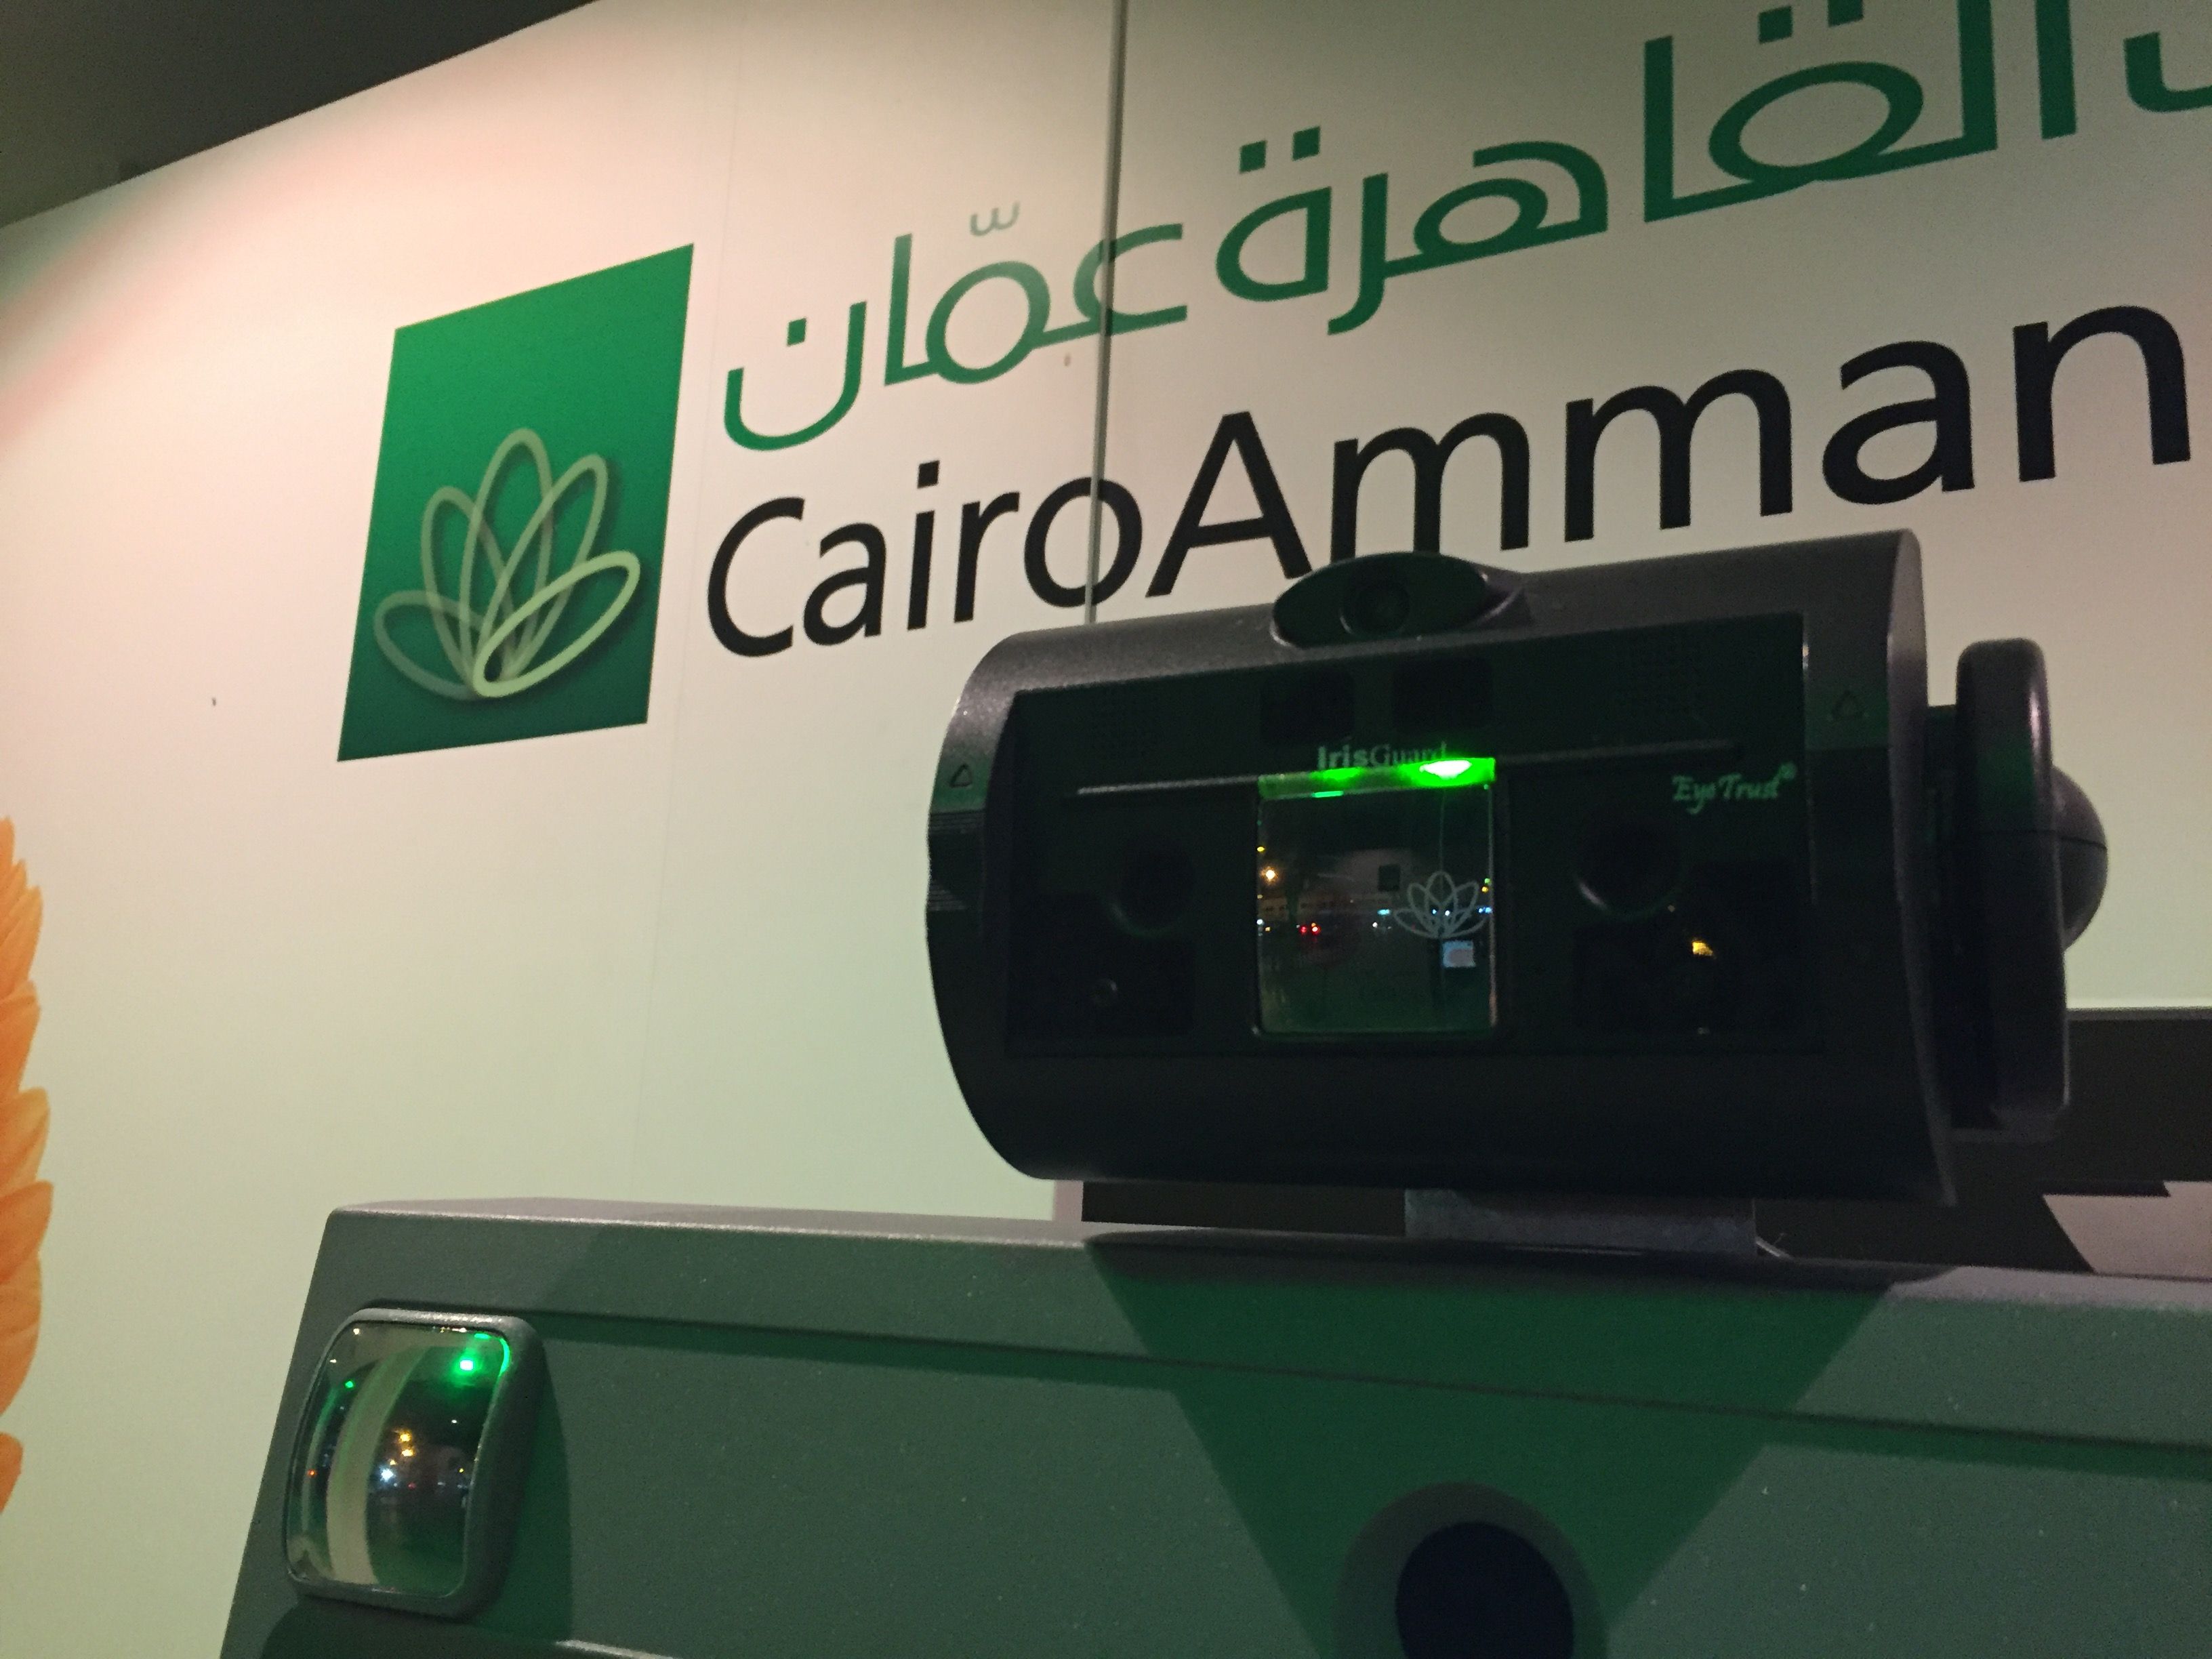 Iris-scanners like this one, attached to ATM machines at branches of Cairo Amman Bank across Jordan, allow registered refugees to access their UNHCR cash assistance and money for food assistance, issues by the World Food Program. Refugees have their iris scanned when they first register with UNHCR. This data is cross-referenced when they access their benefits through the ATMs. Image by Rachel Townzen. Jordan, 2016.